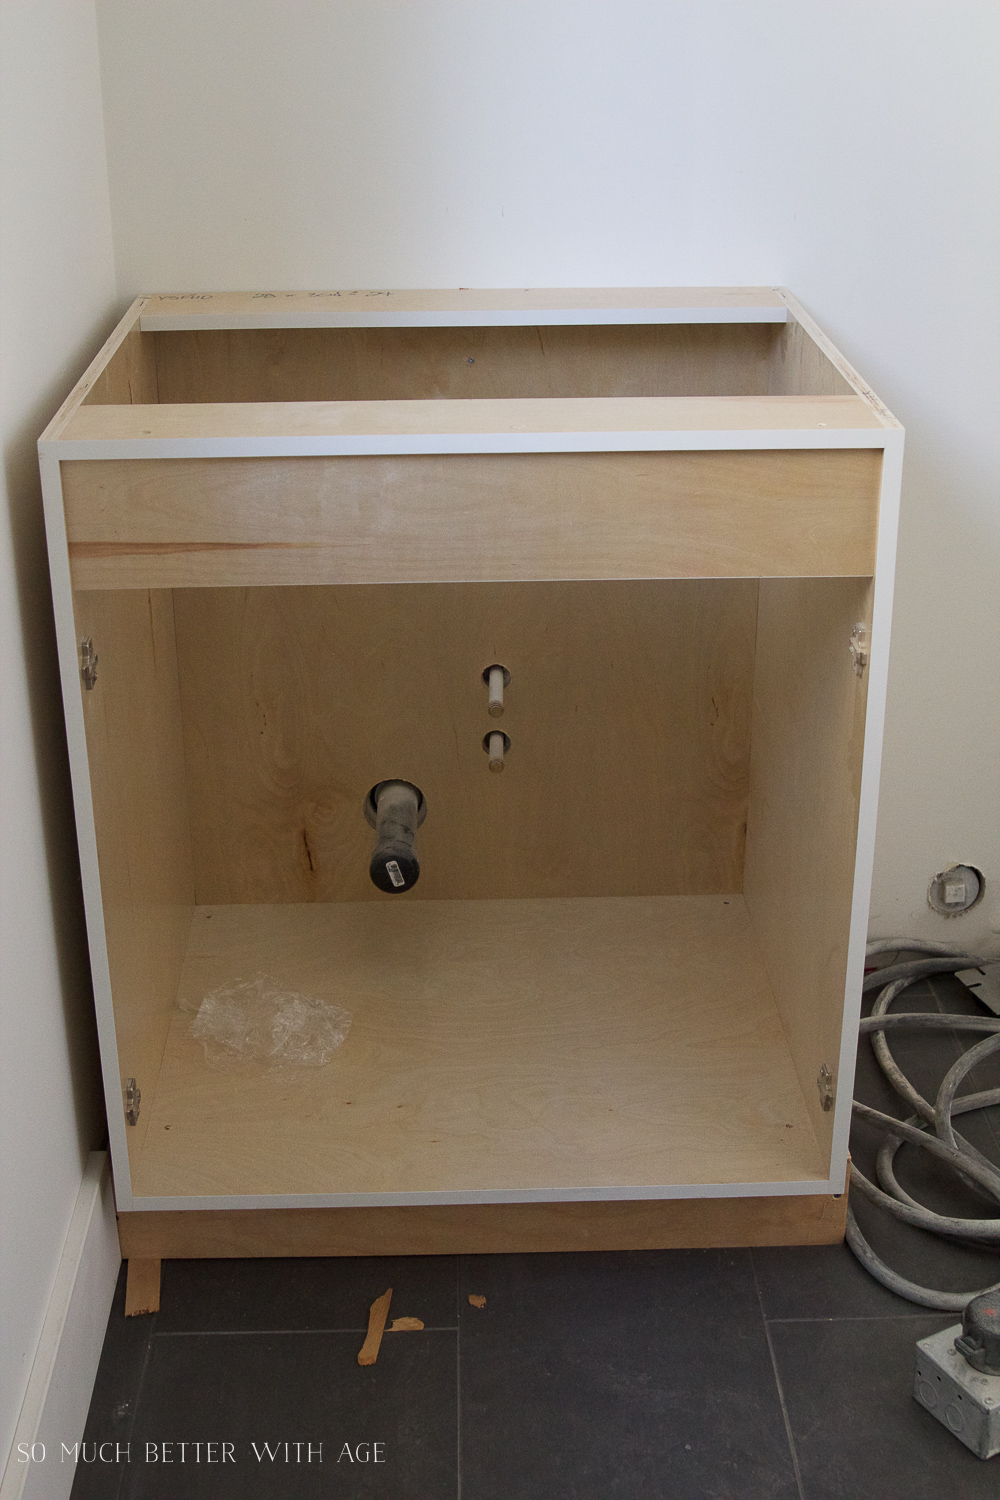 Building a cabinet around the small sink.